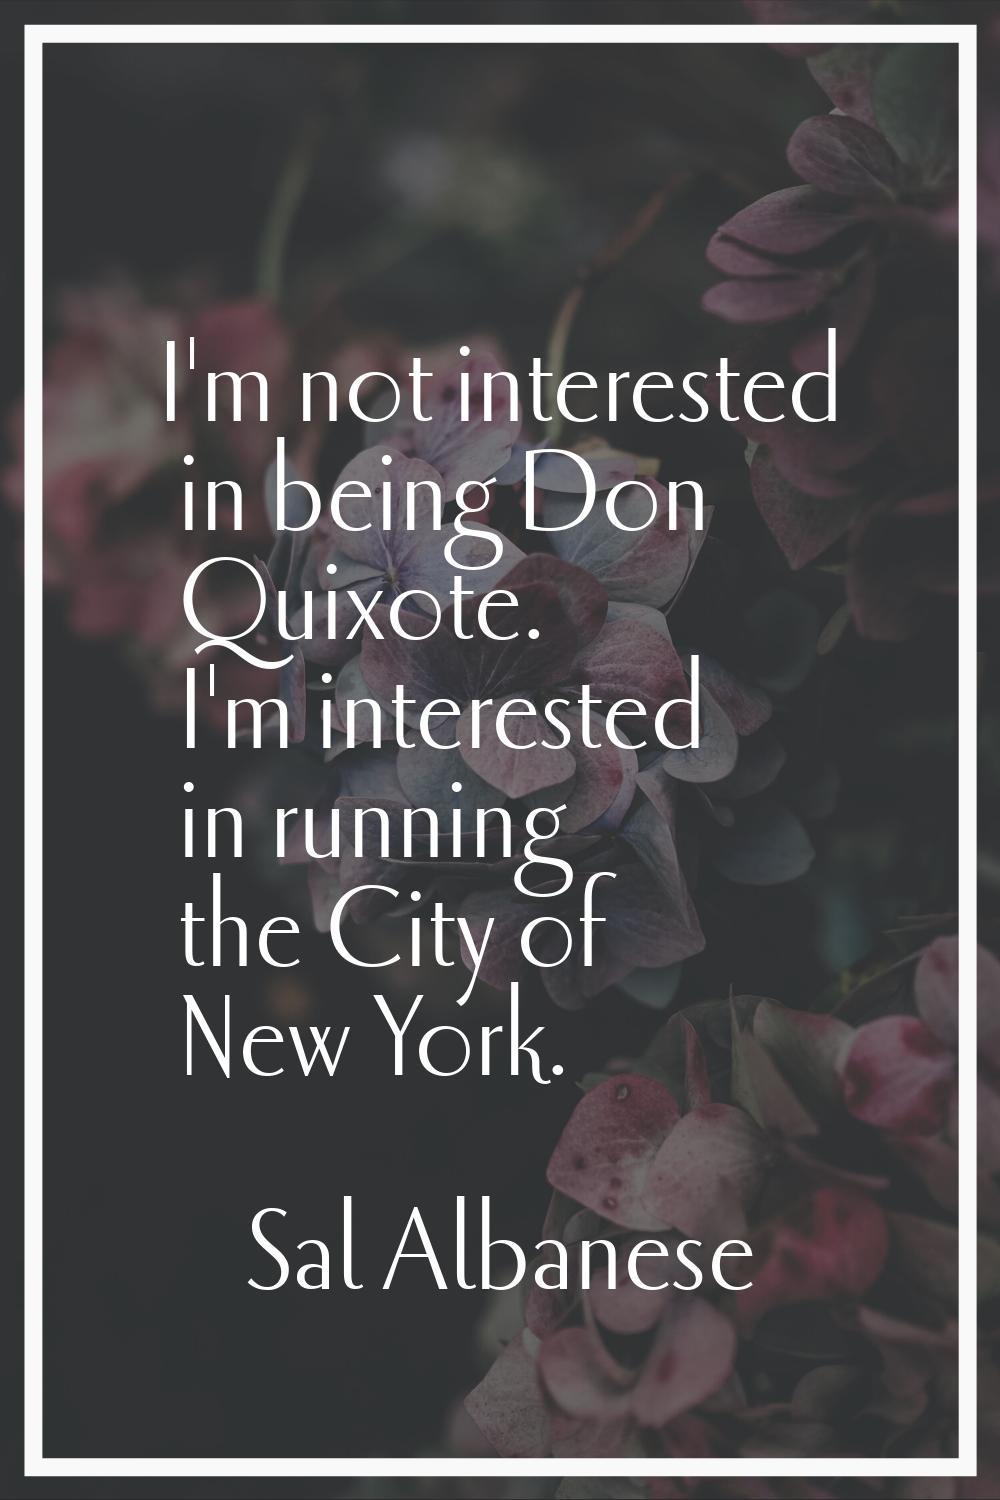 I'm not interested in being Don Quixote. I'm interested in running the City of New York.